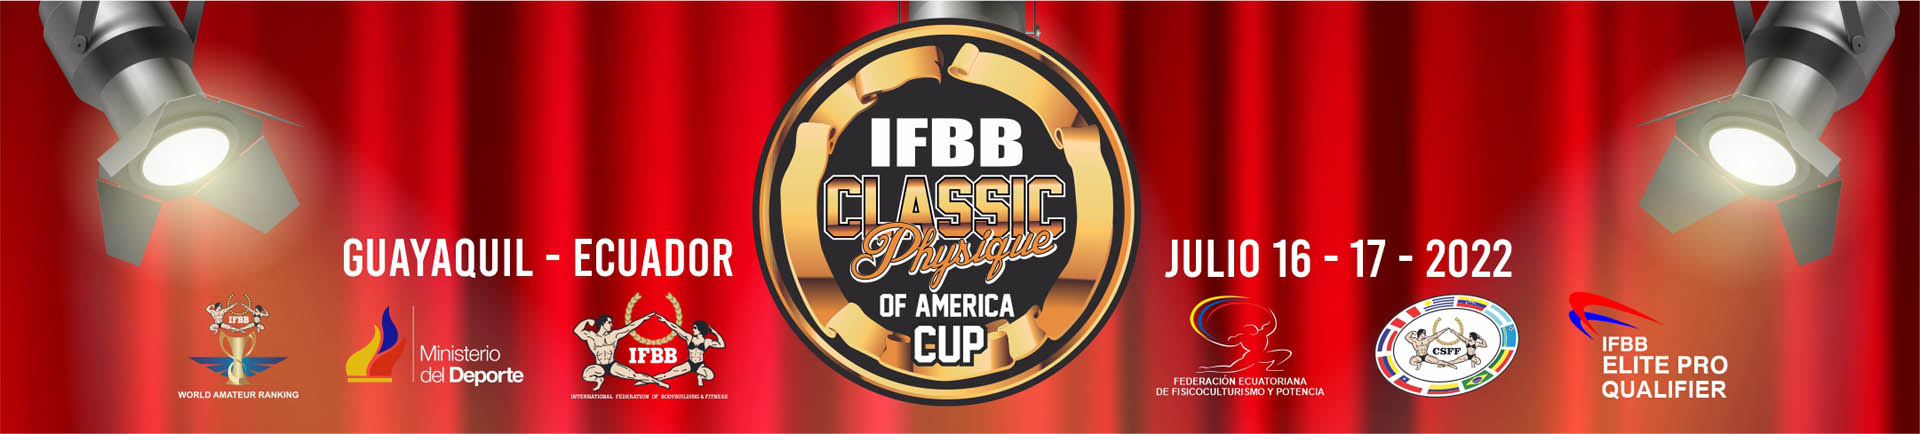 IFBB CLASSIC PHYSIQUE OF AMERICAN CUP